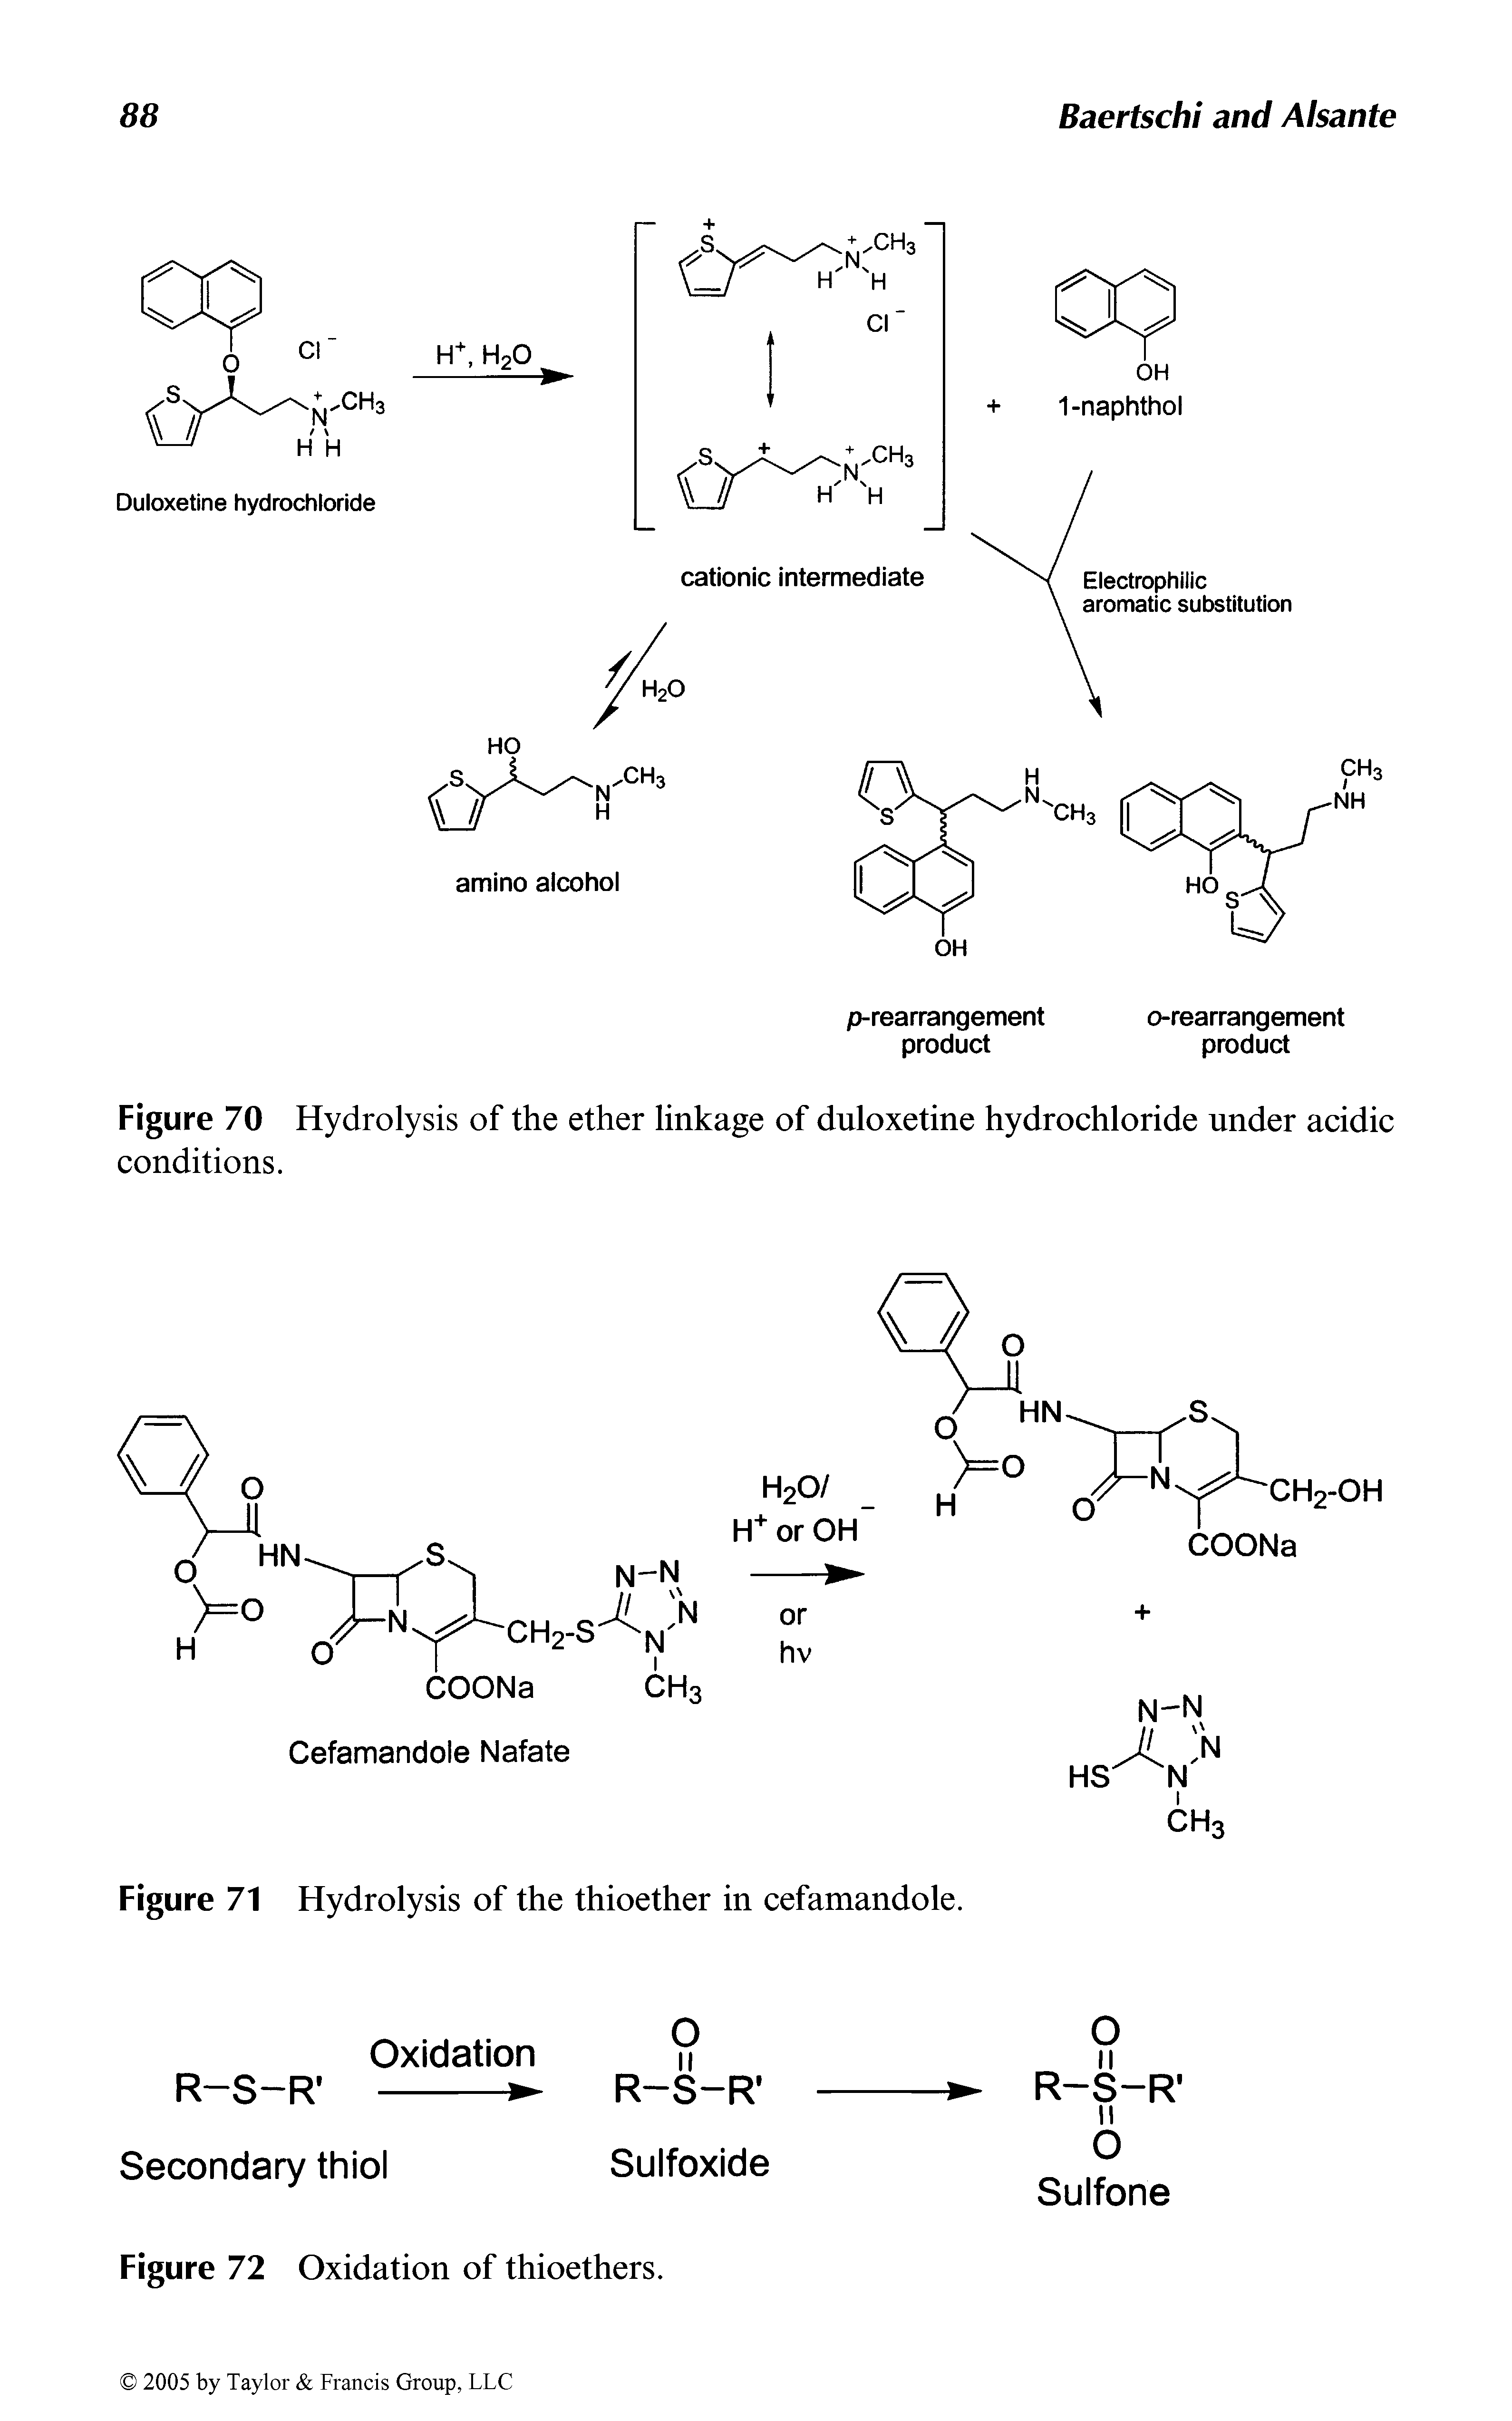 Figure 70 Hydrolysis of the ether linkage of duloxetine hydrochloride under acidic conditions.